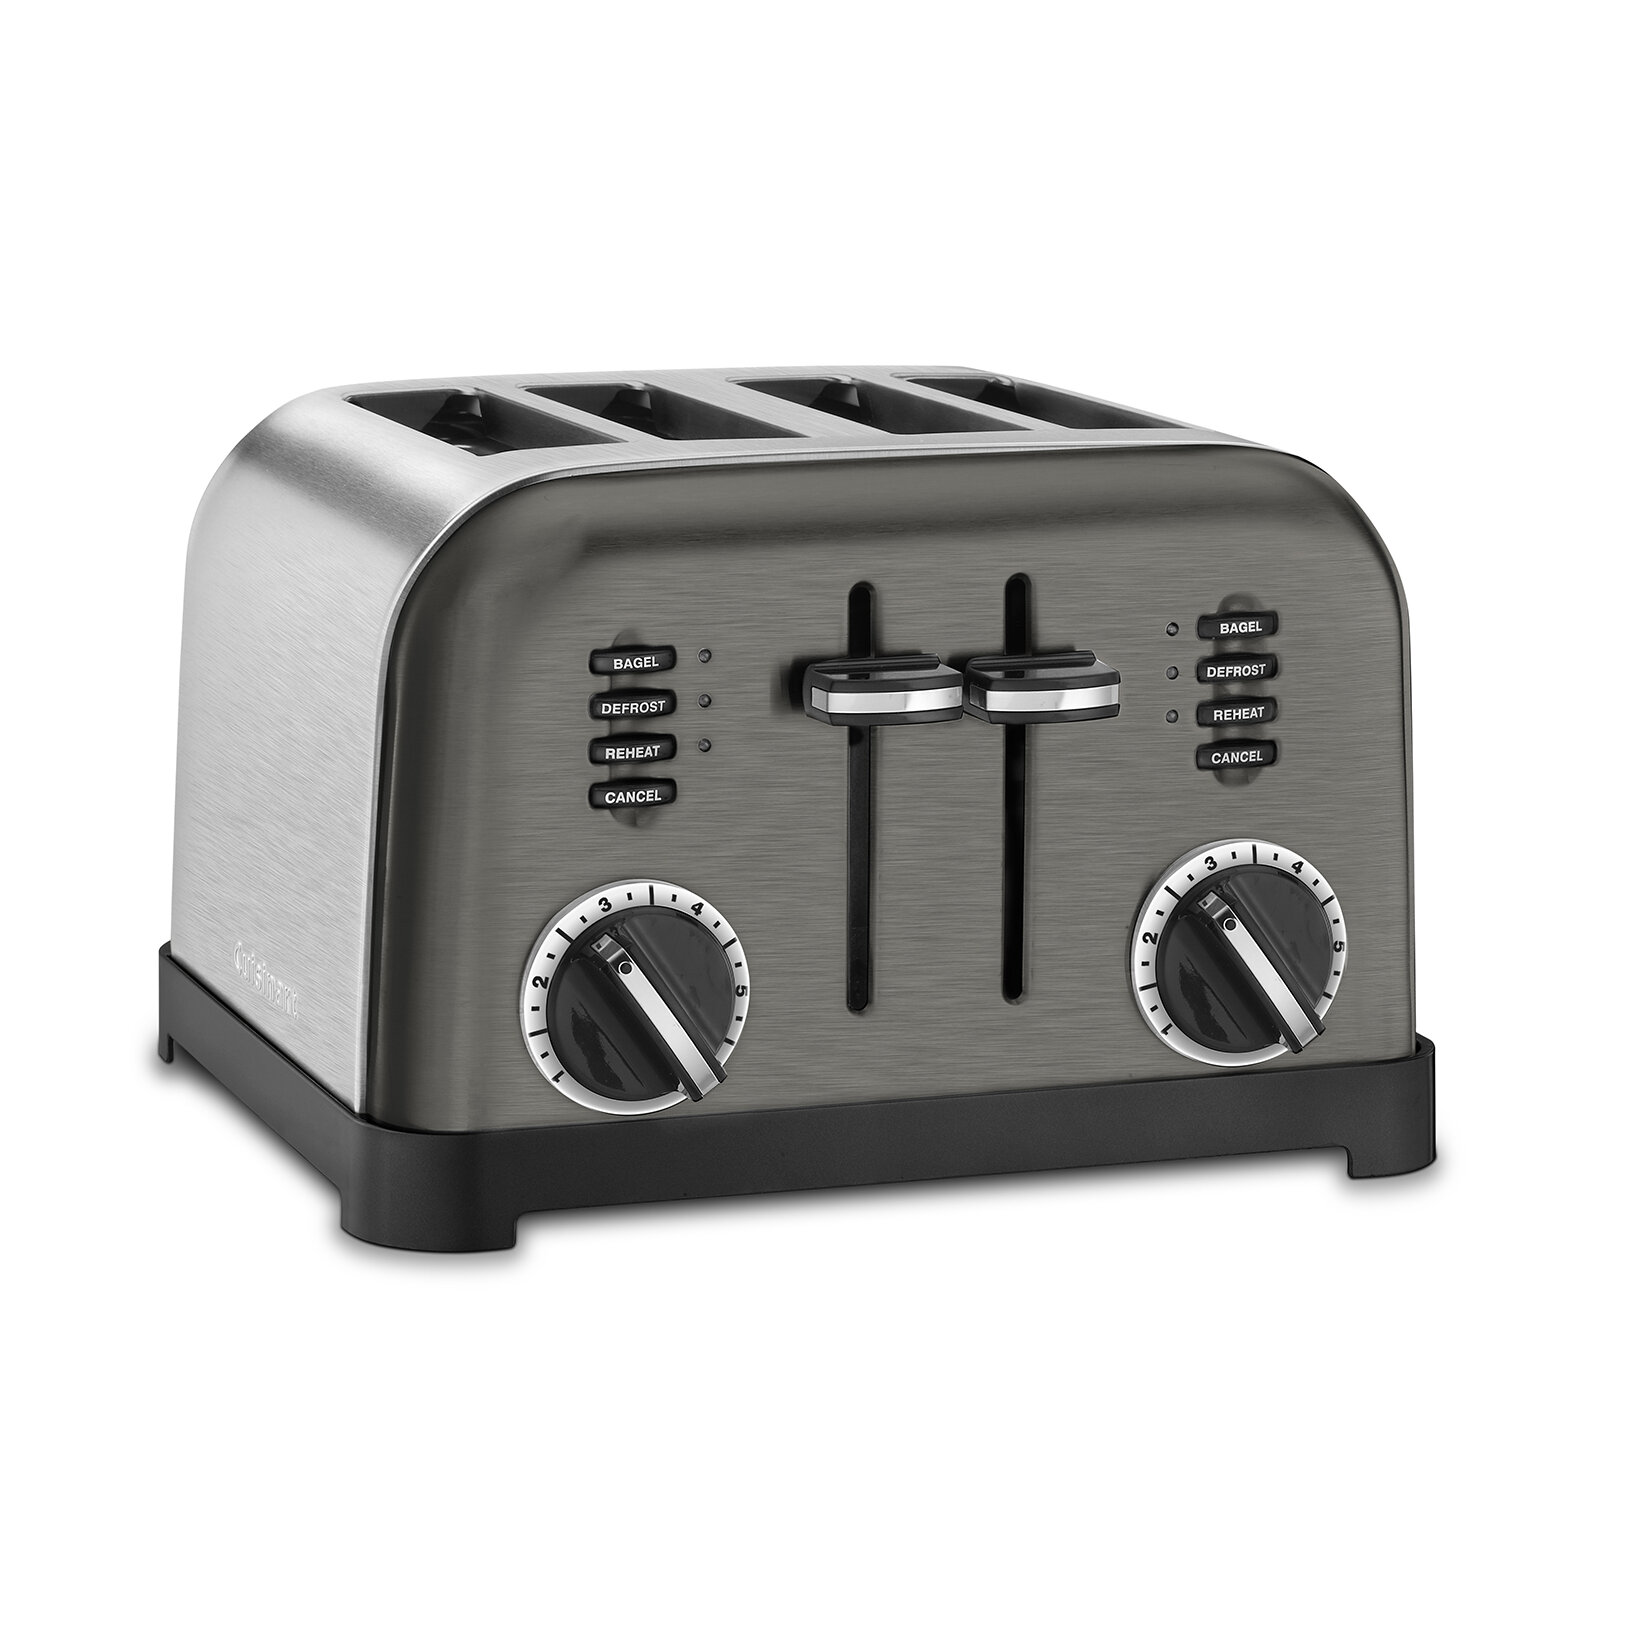 HoLife 4 Slice Long Slot Toaster Best Rated Prime, Stainless Steel Bre –  KITCHEN BATH DISTRIBUTORS